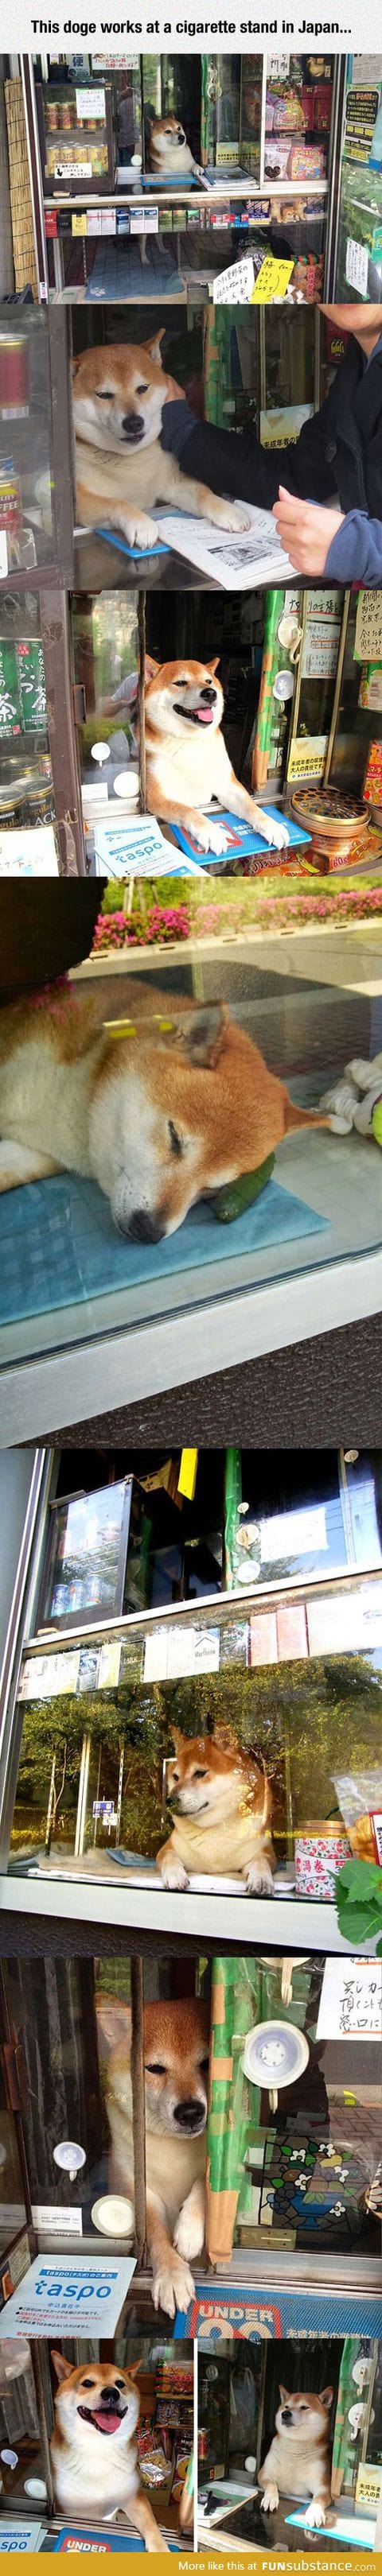 Doge the store worker